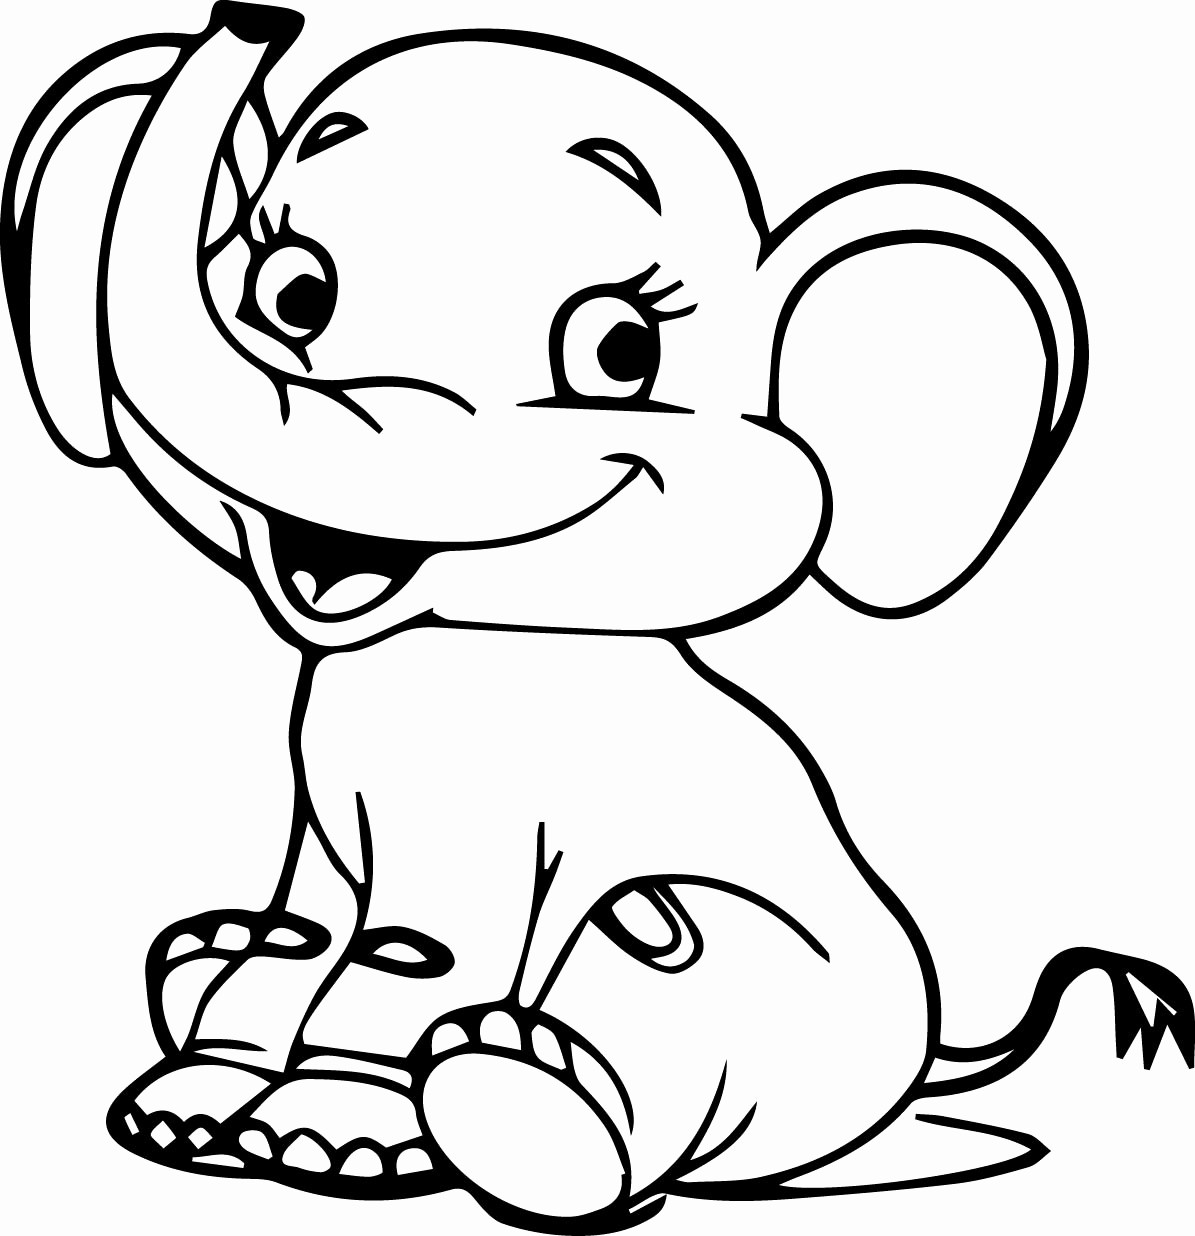 Baby Elephant Coloring Pages
 Cute Baby Elephant Drawing at GetDrawings